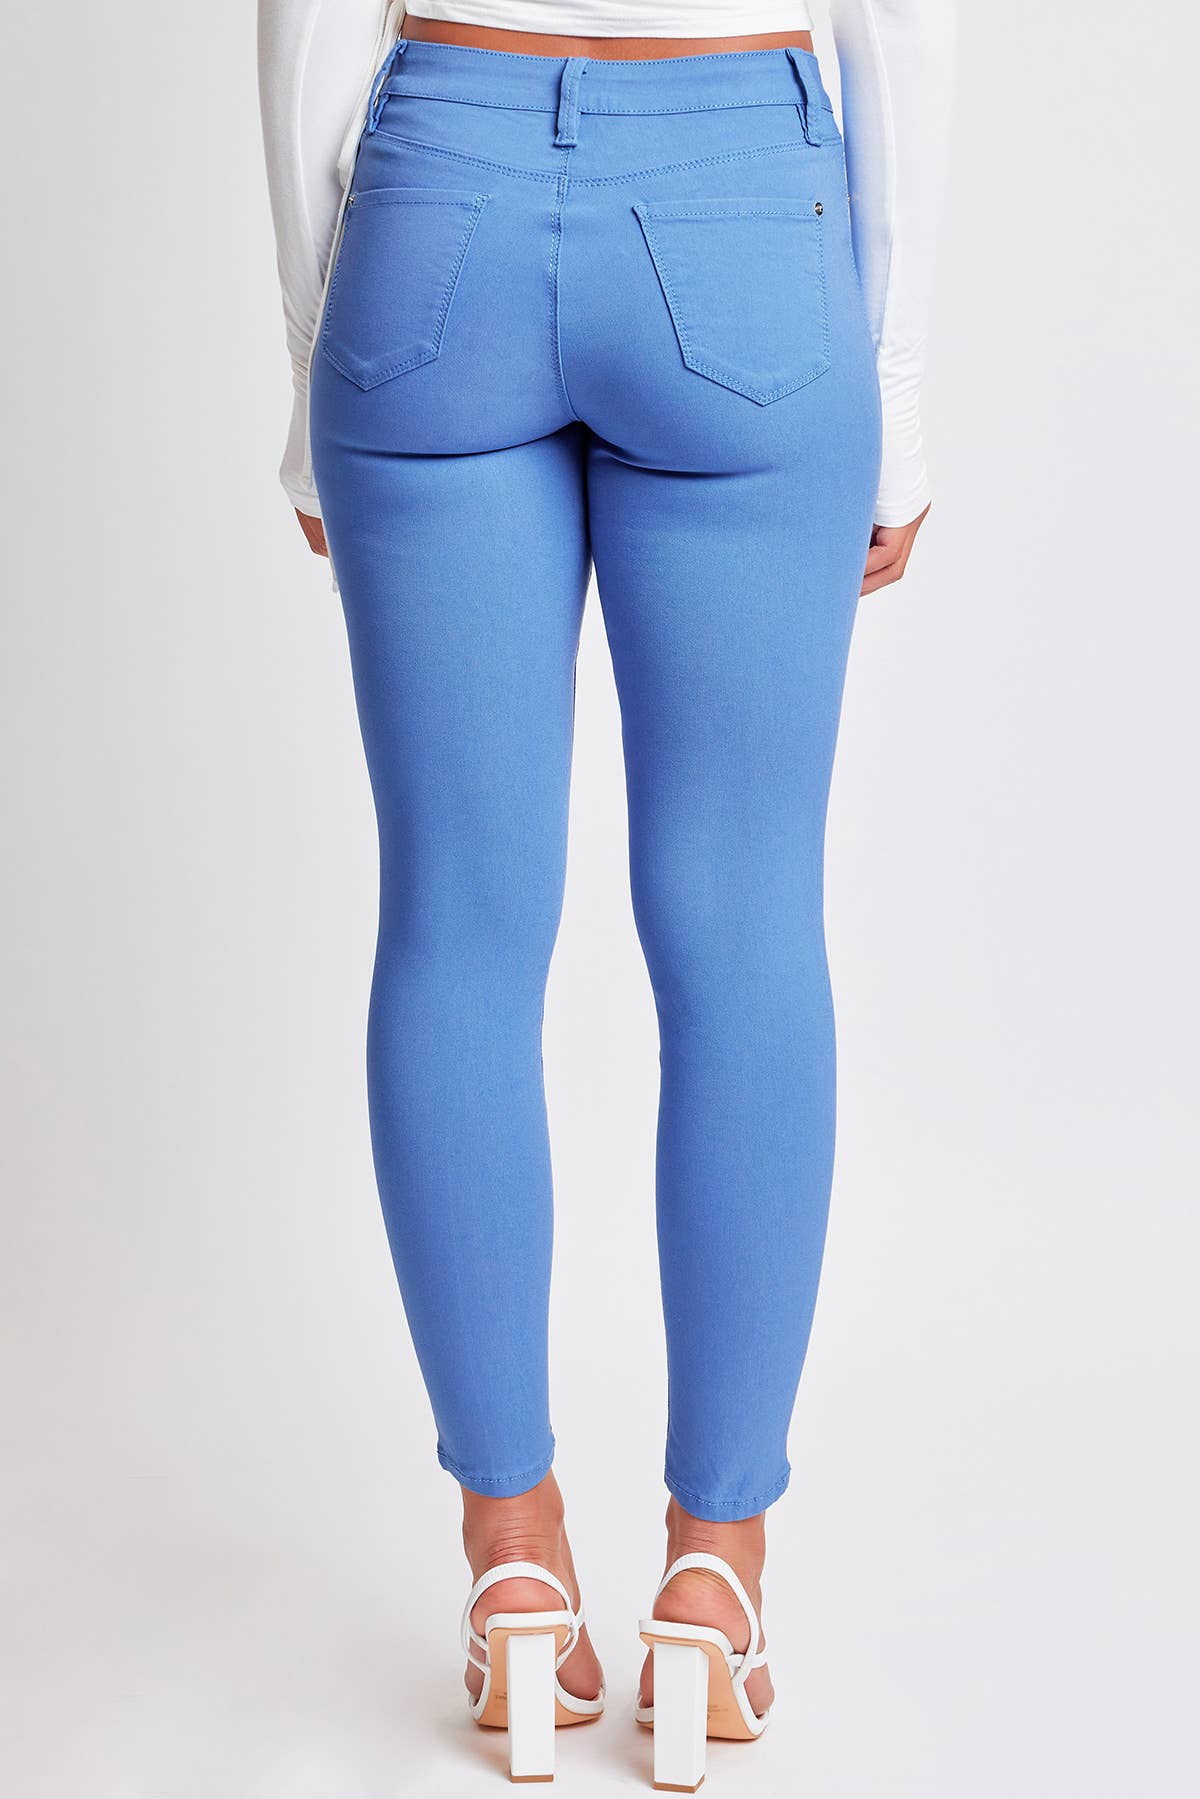 Blue Bay Hyperstretch Mid-Rise Skinny Jean